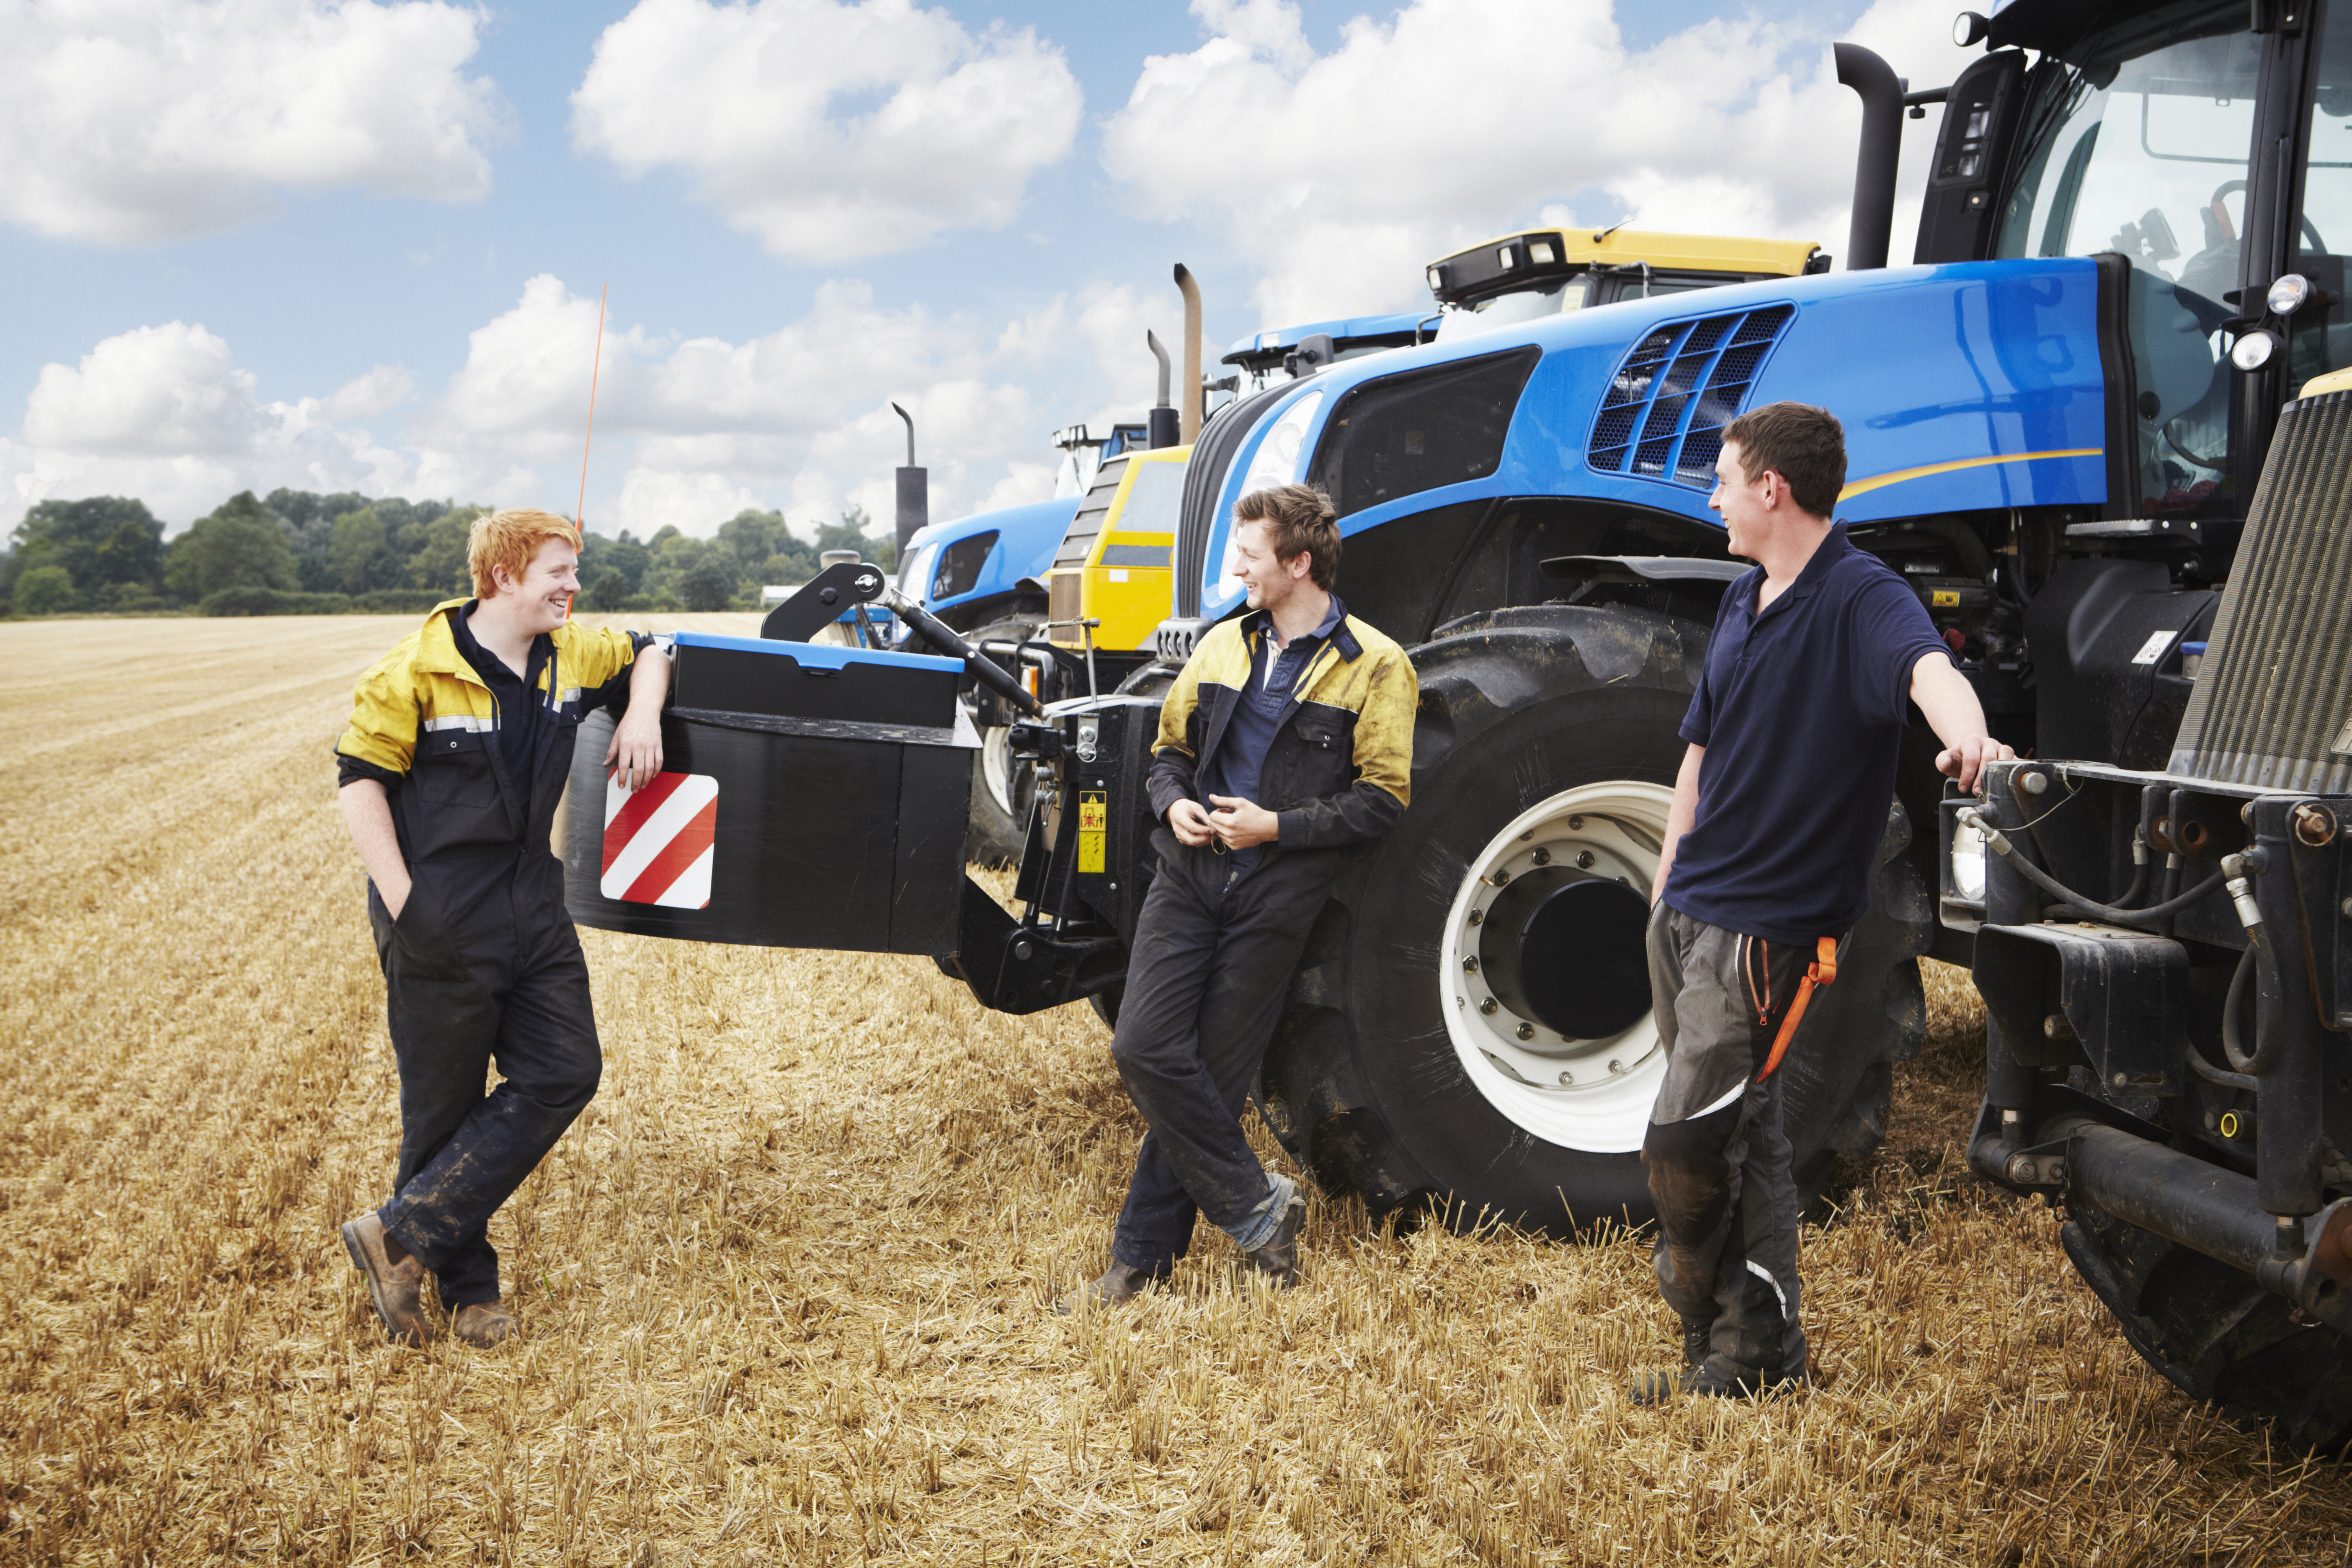 A group of men standing next to a tractor